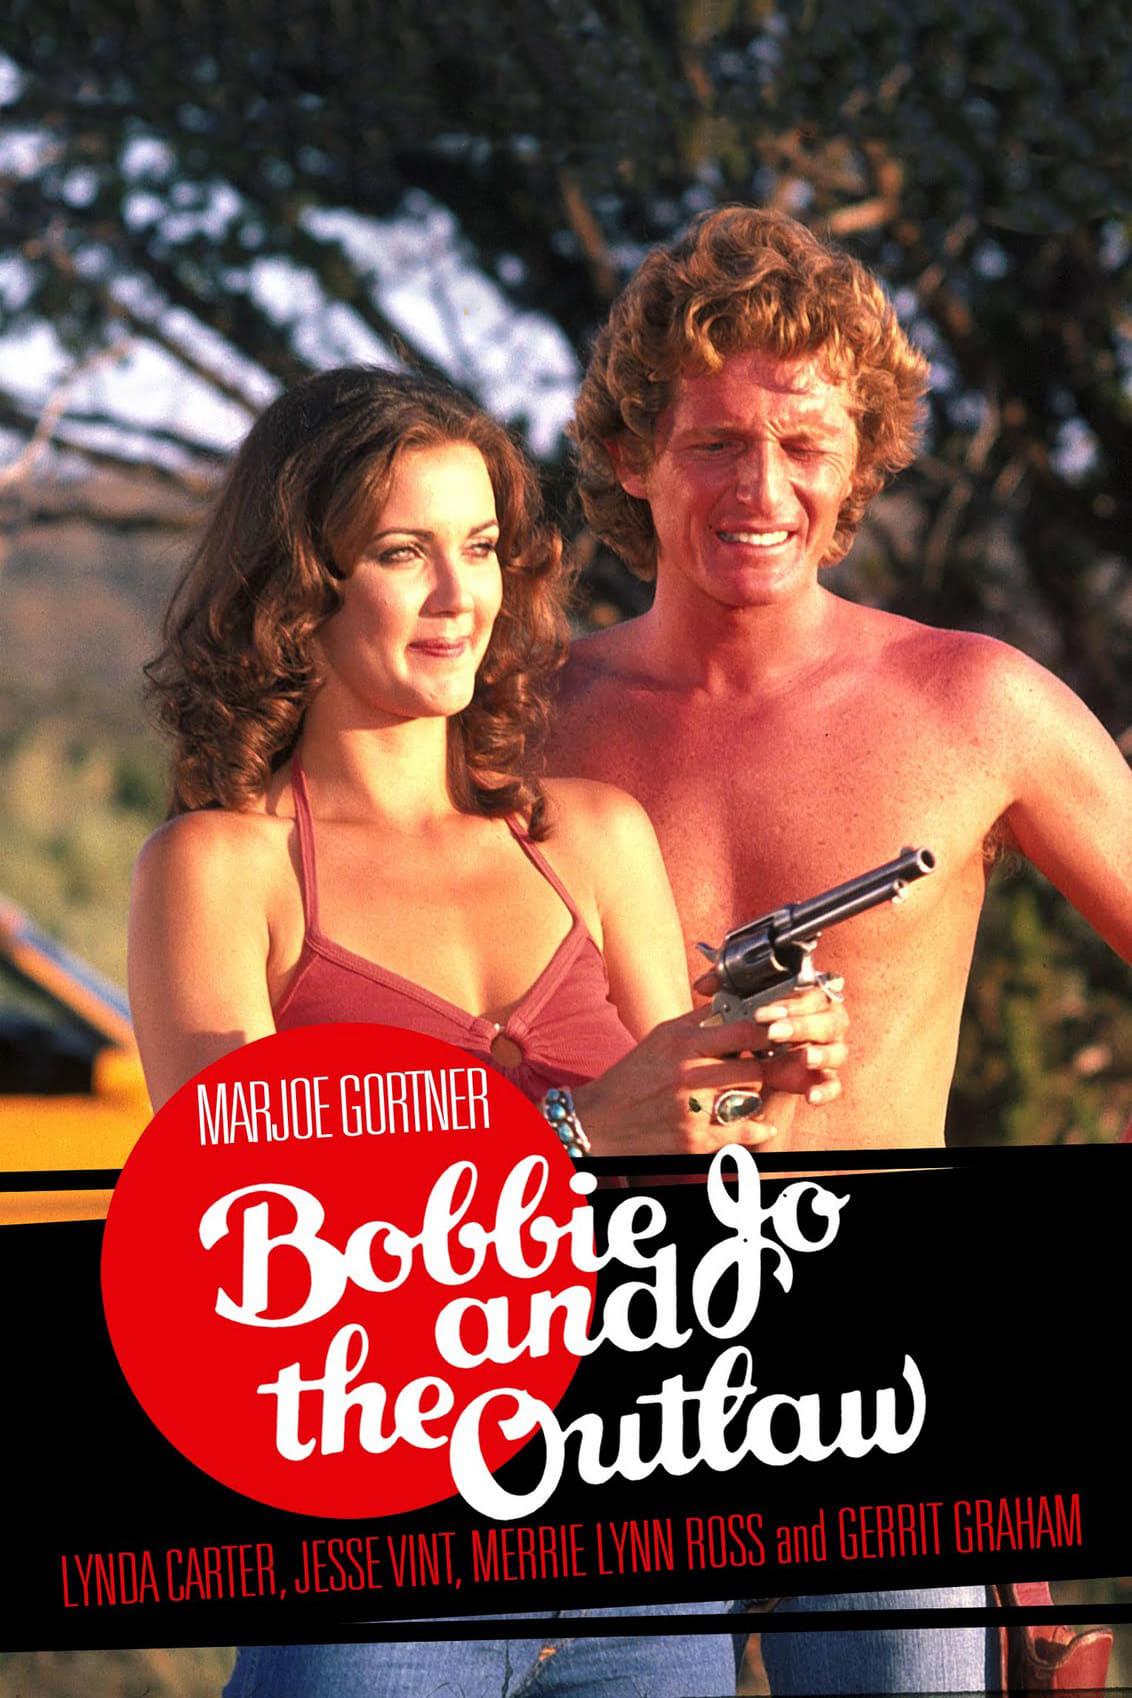 Bobbie Jo and the Outlaw poster